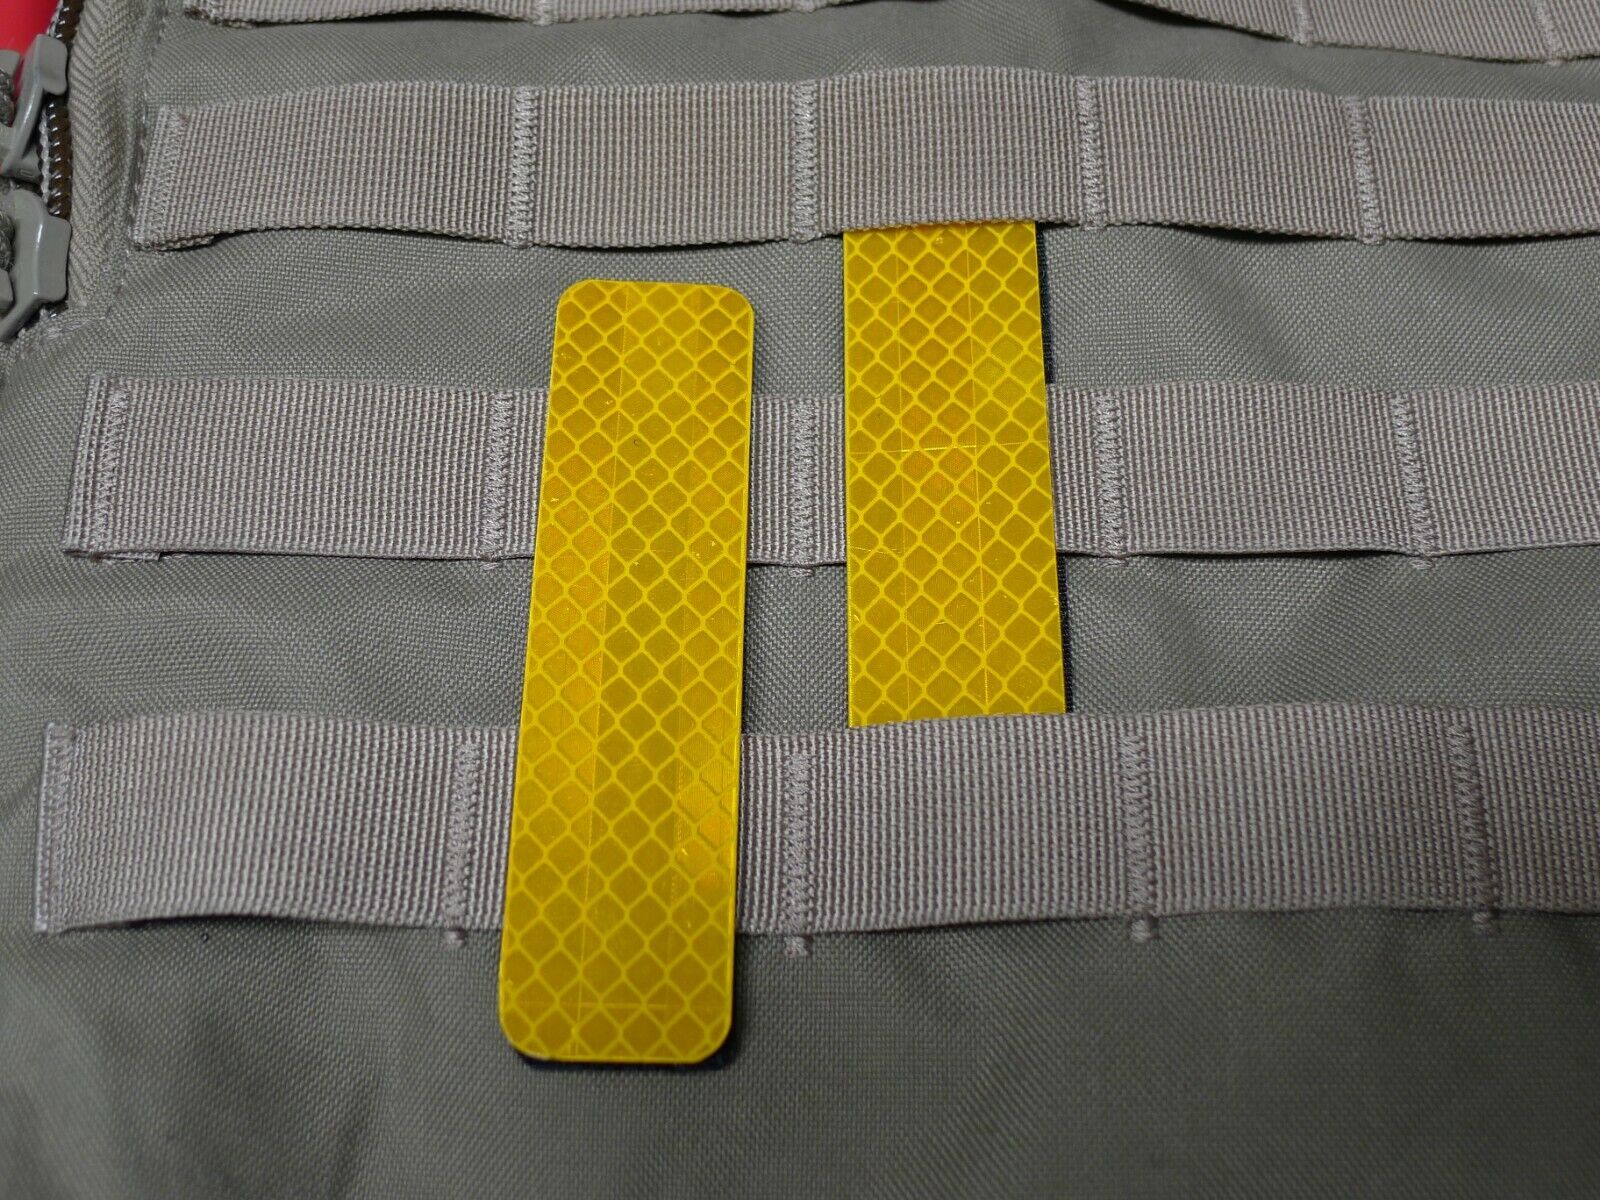 3M Yellow reflective patch for tactical gear Molle loops. 1 x 4 inches. 2 pcs.